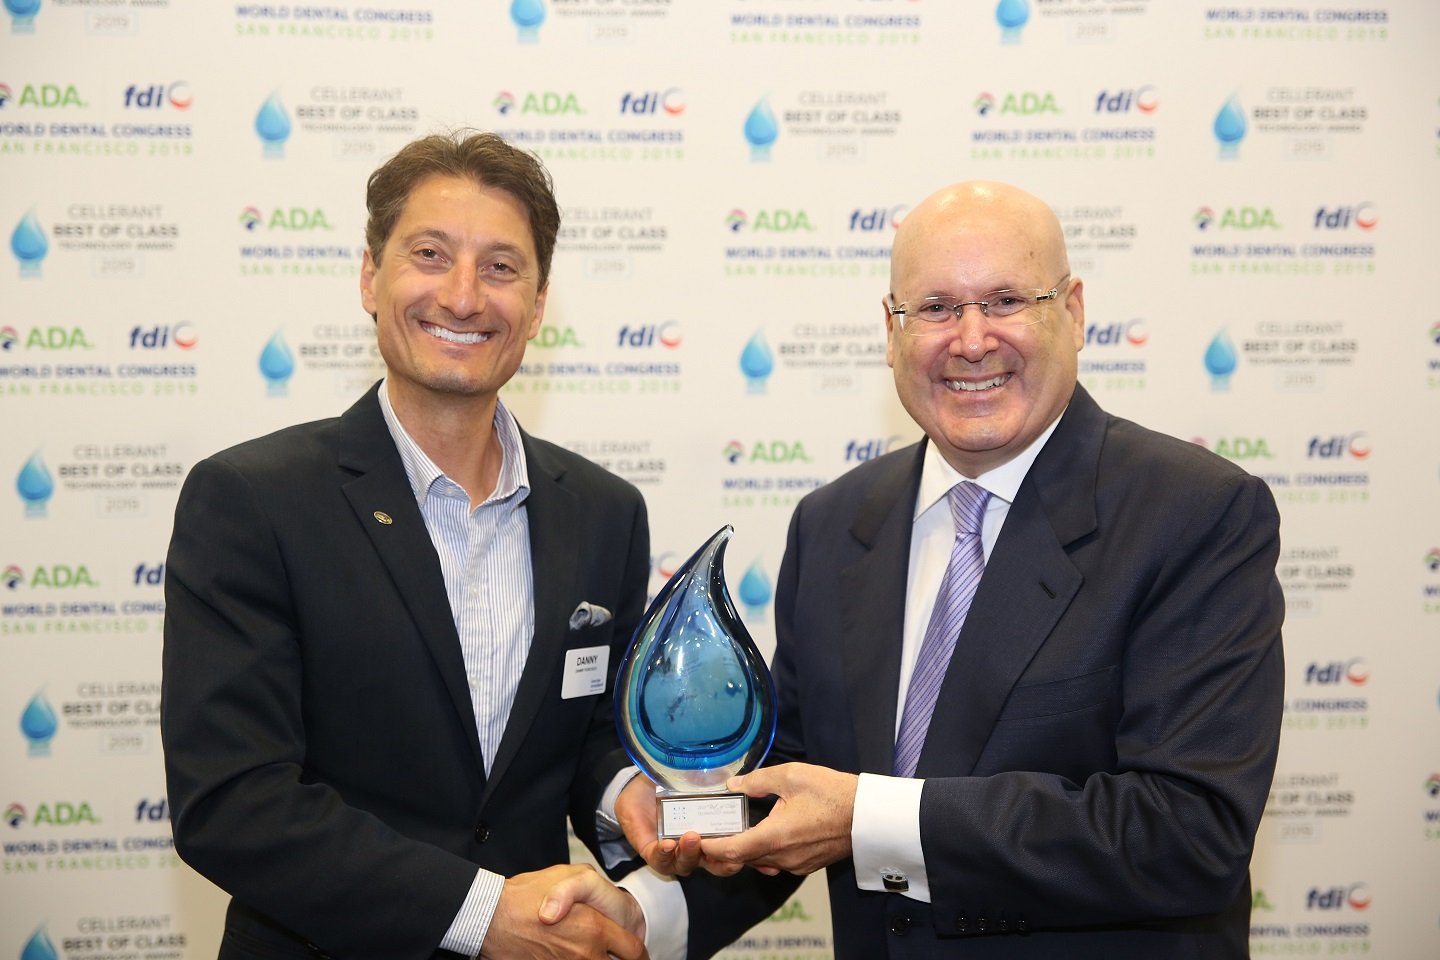 Lou Shuman, DMD, CAGS, (right) founder and creator of the Best of Class Technology Award presented the award to Danny Forcucci at the ADA FDI World Congress in September.